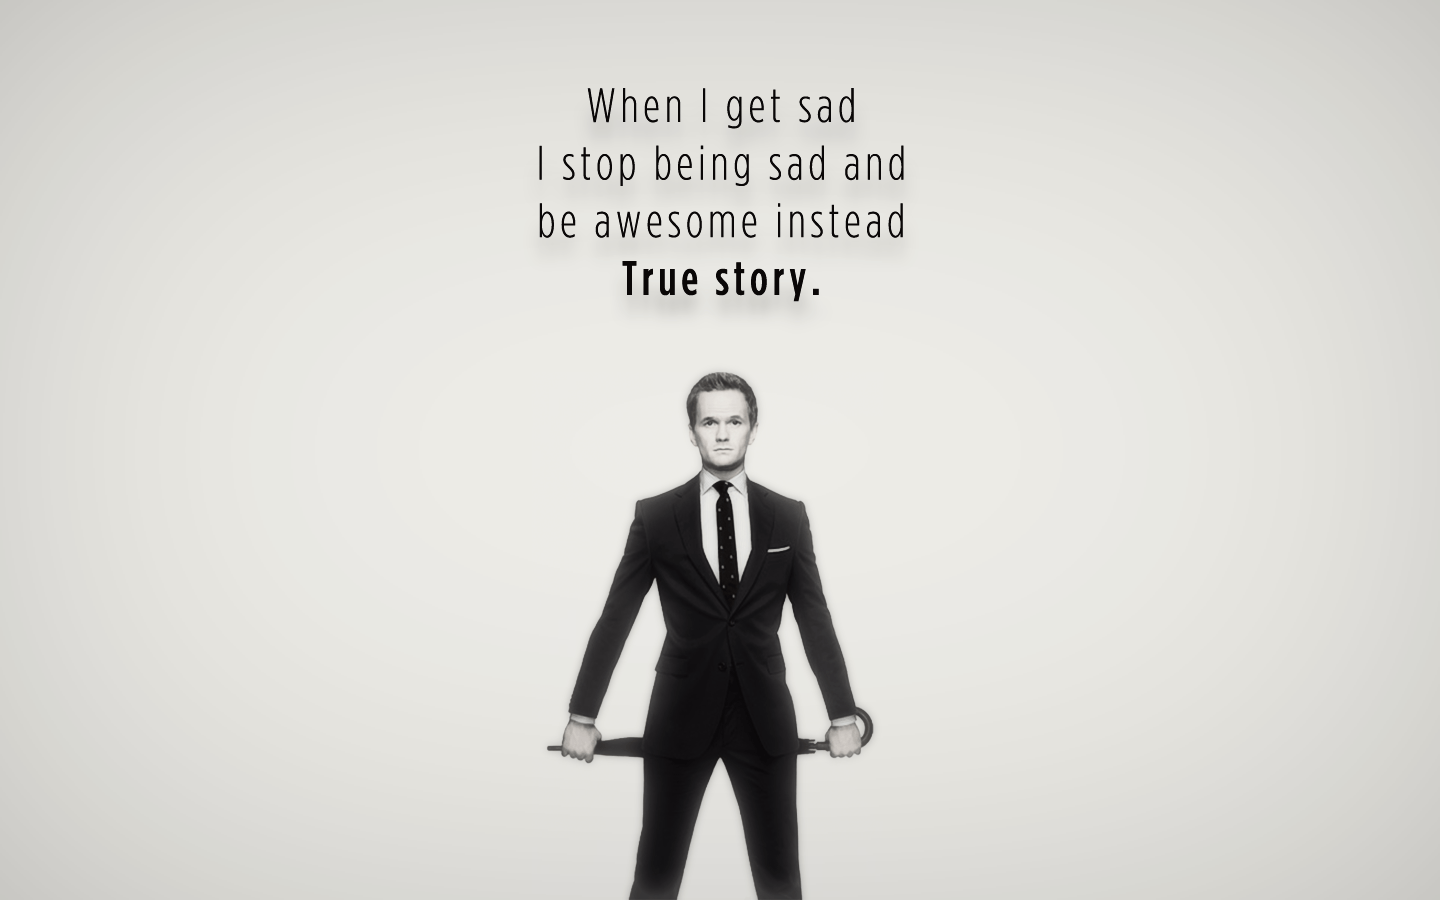 Barney Stinson: Another great “awesome instead” wallpaper